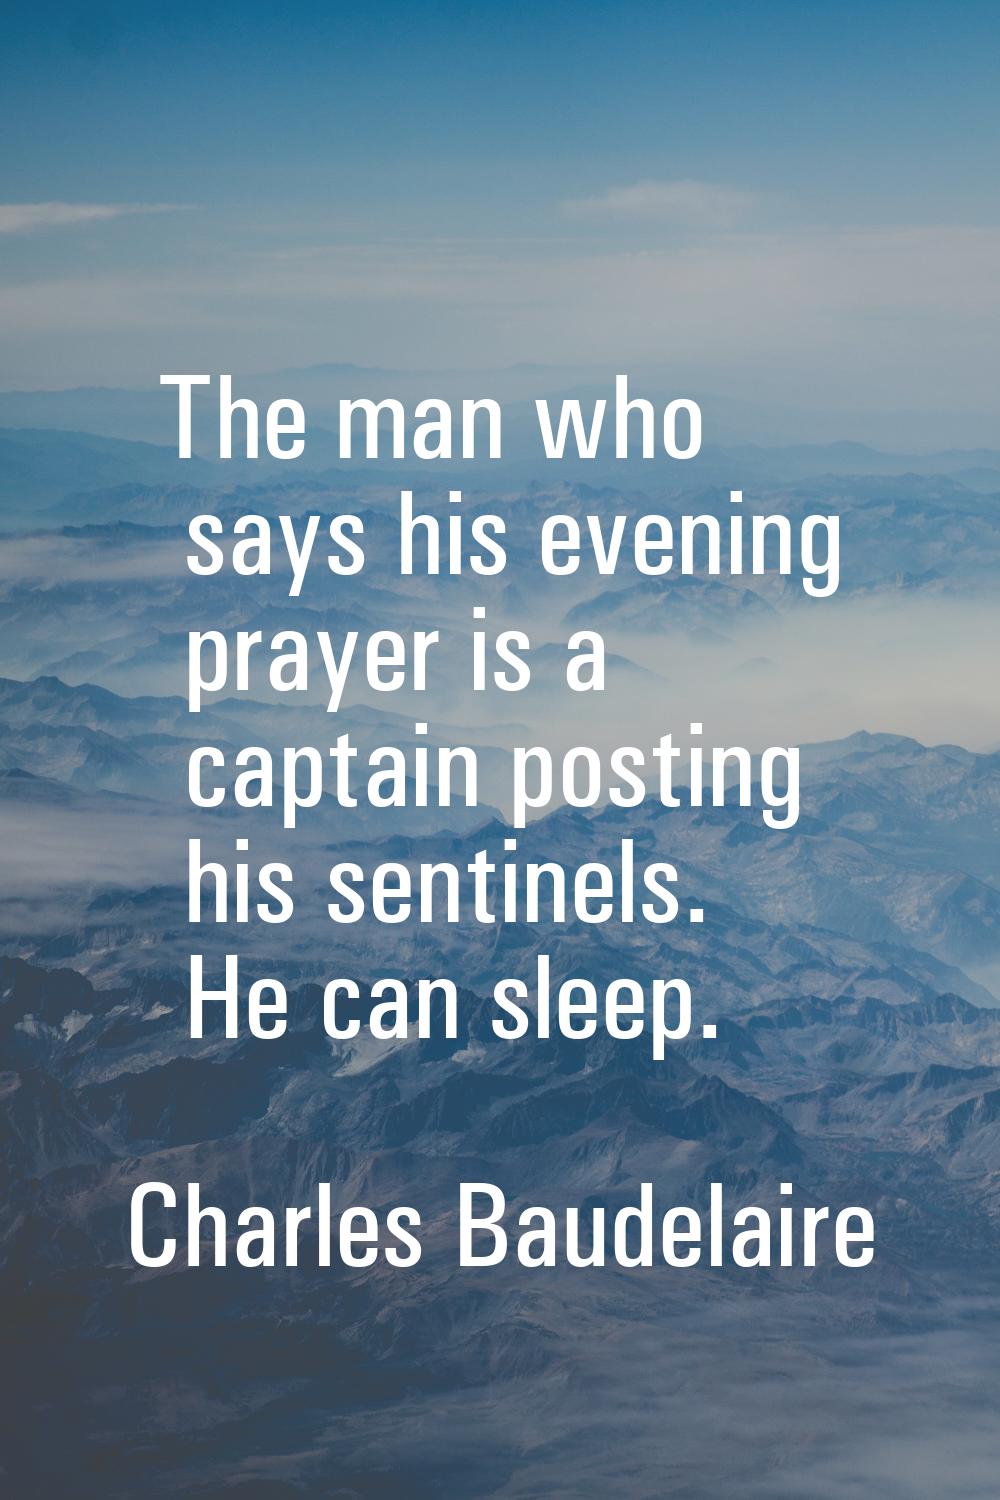 The man who says his evening prayer is a captain posting his sentinels. He can sleep.